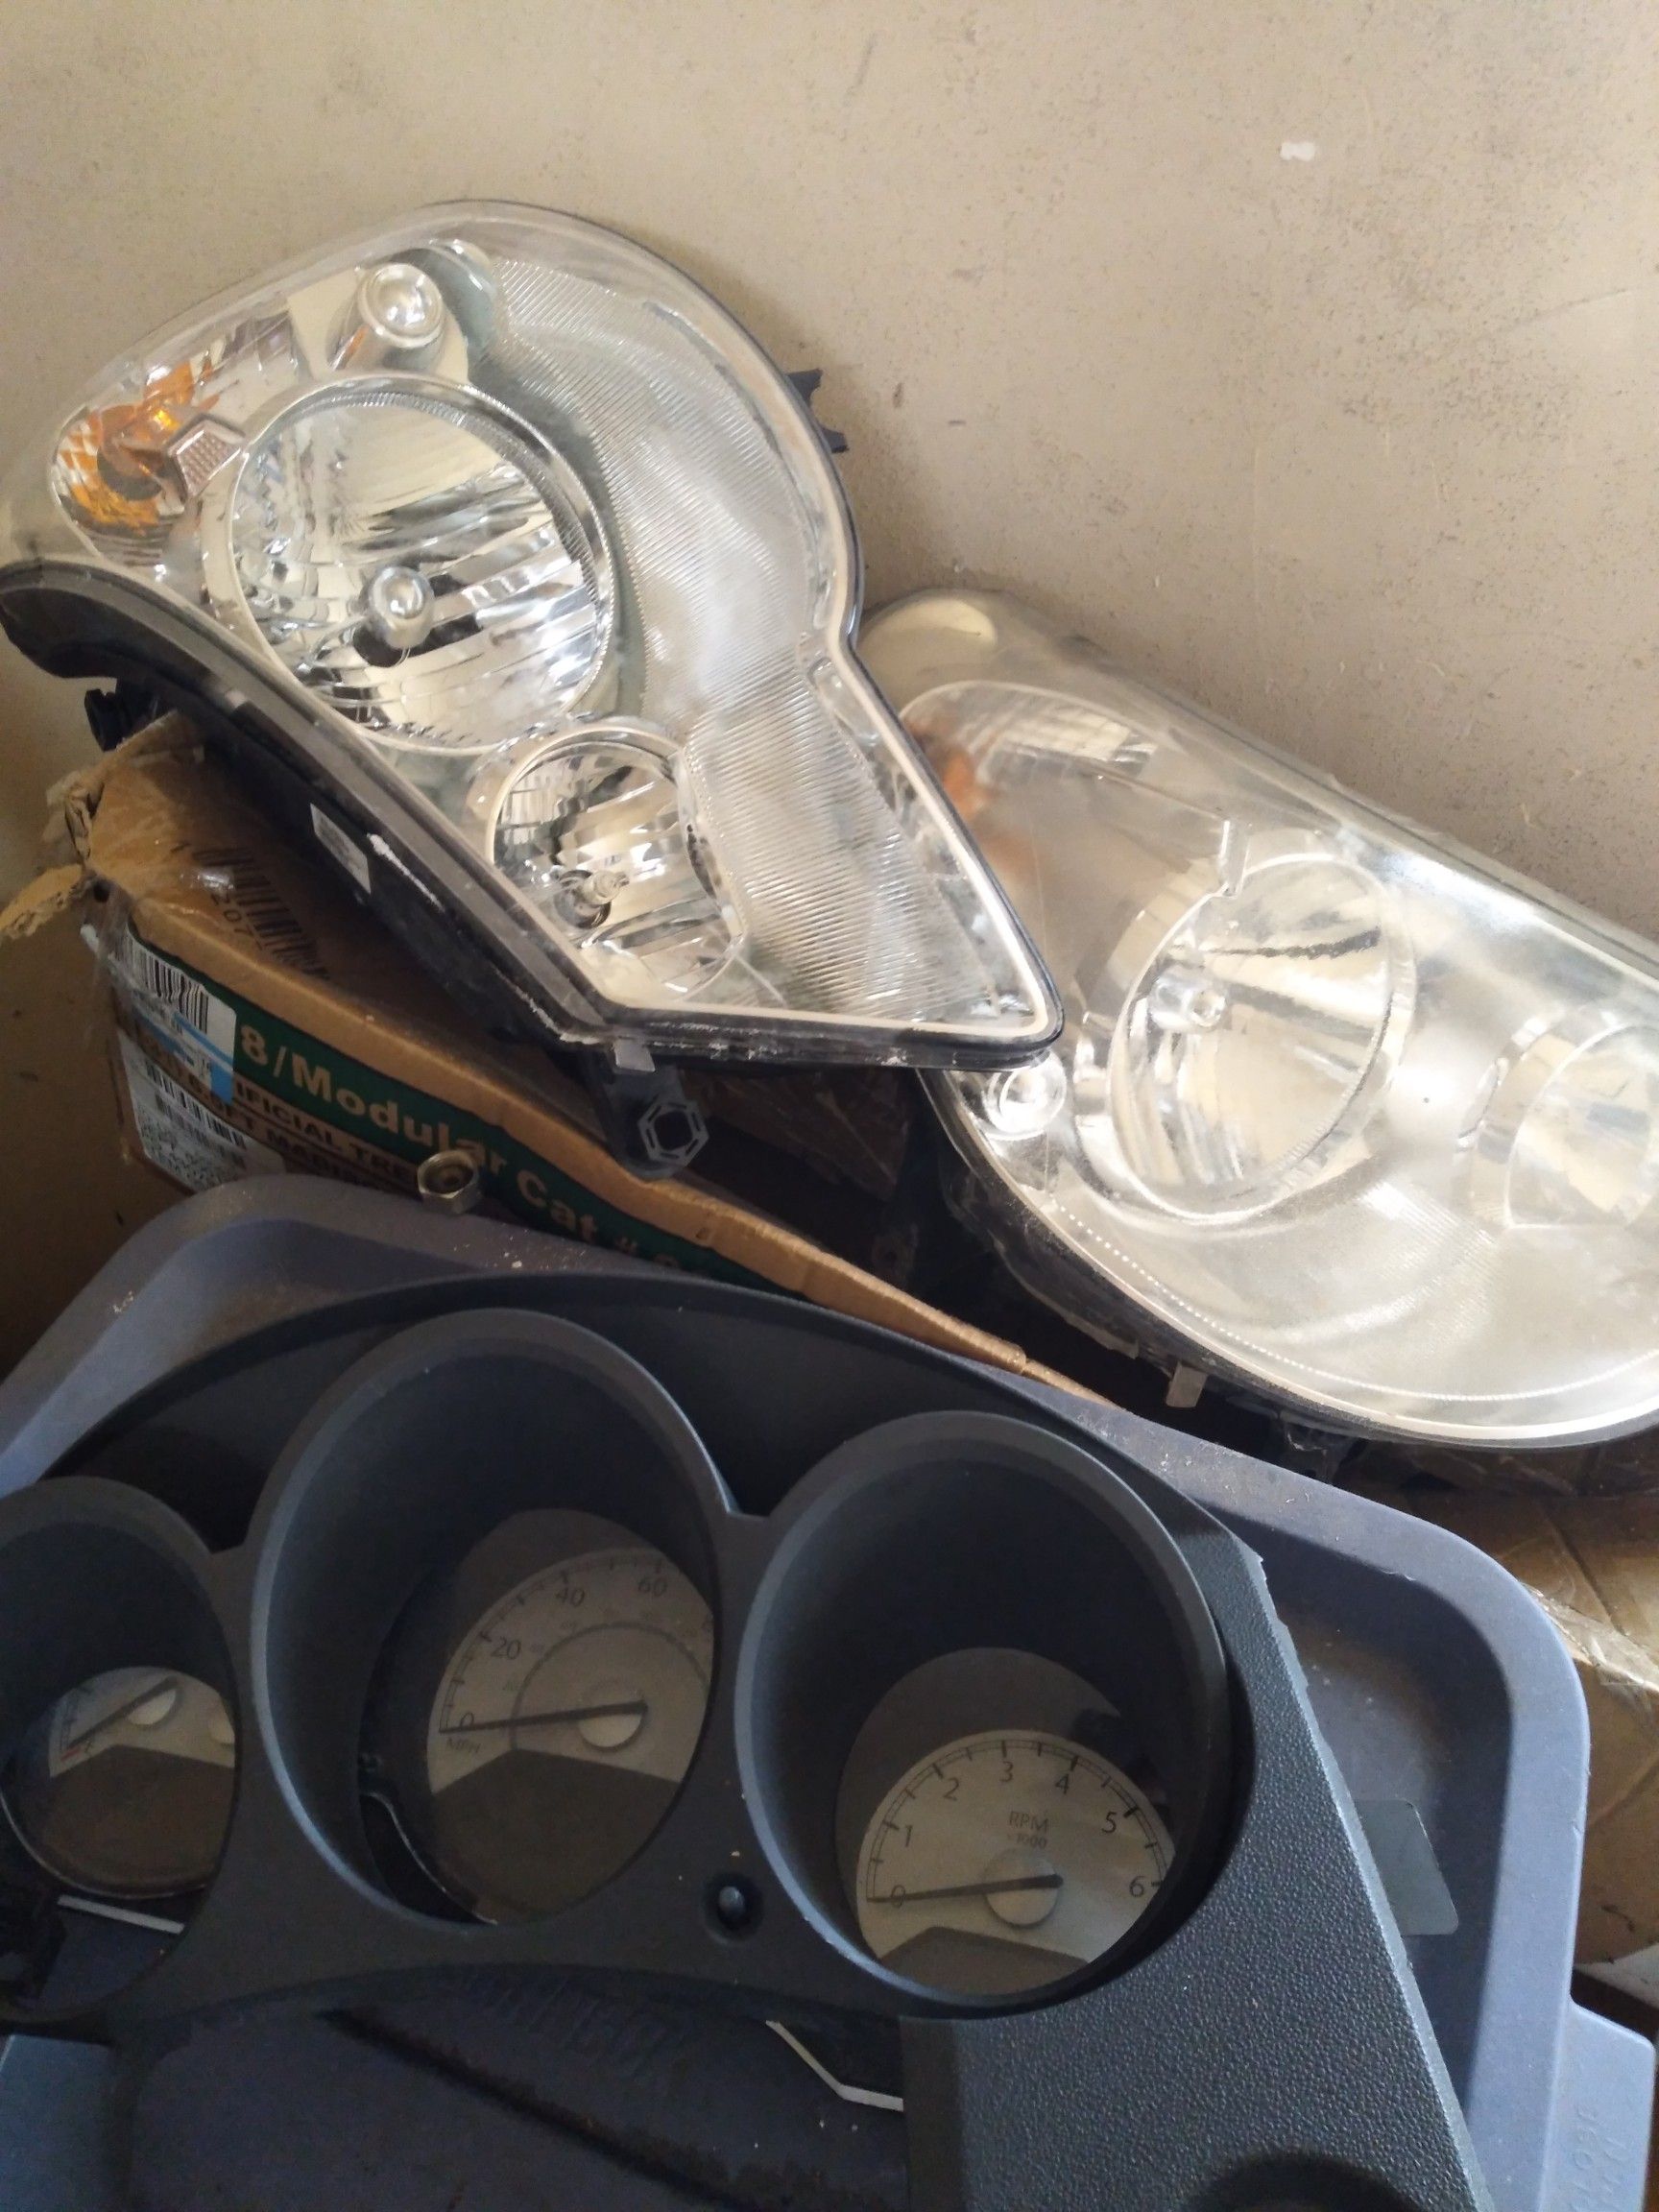 I have two headlights a brand new fender and a cluster for a Chrysler Sebring for sale